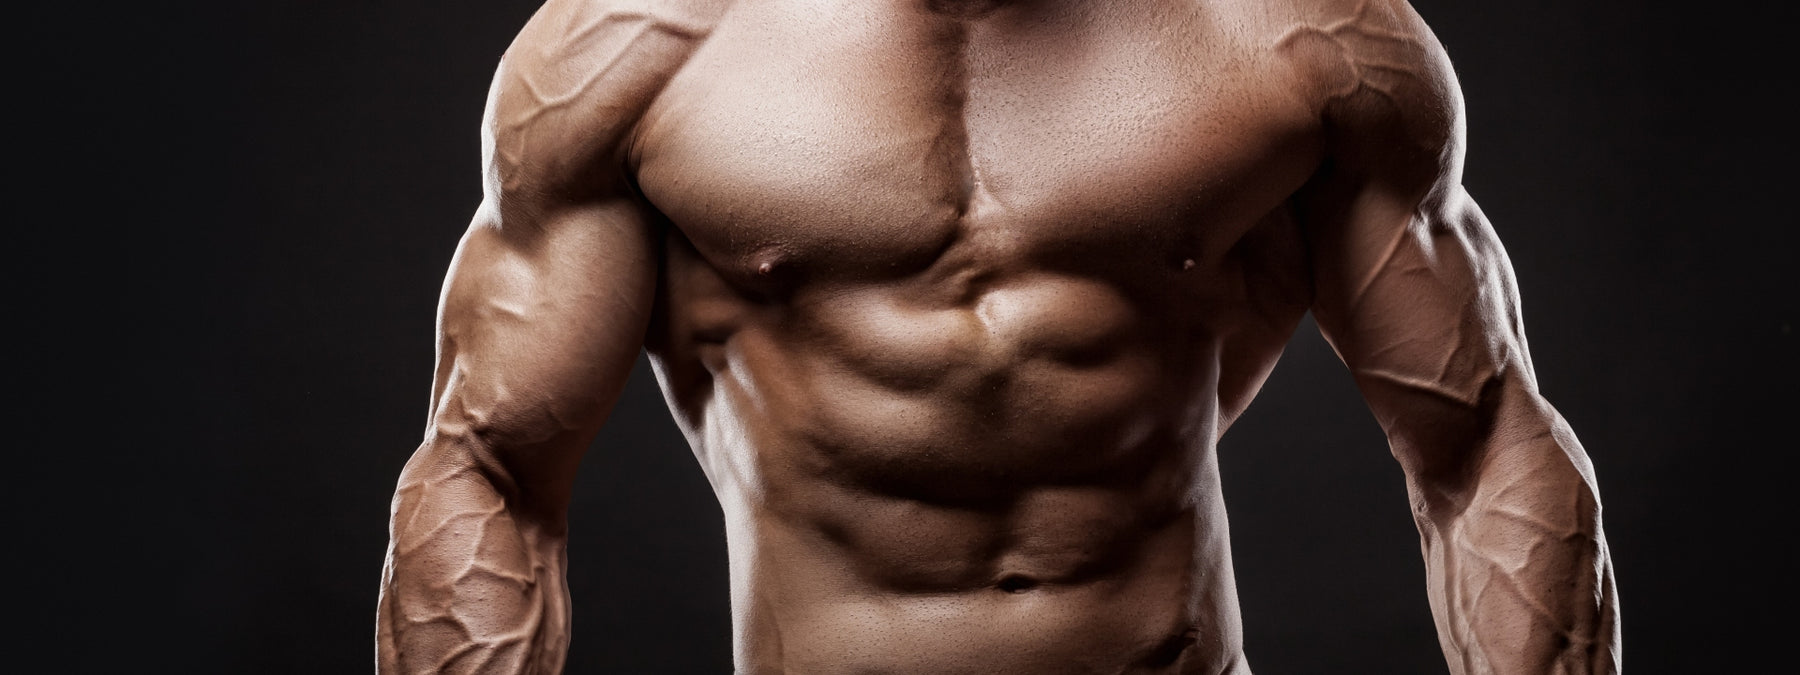 8 Tips to Help You Gain a Pound of Muscle